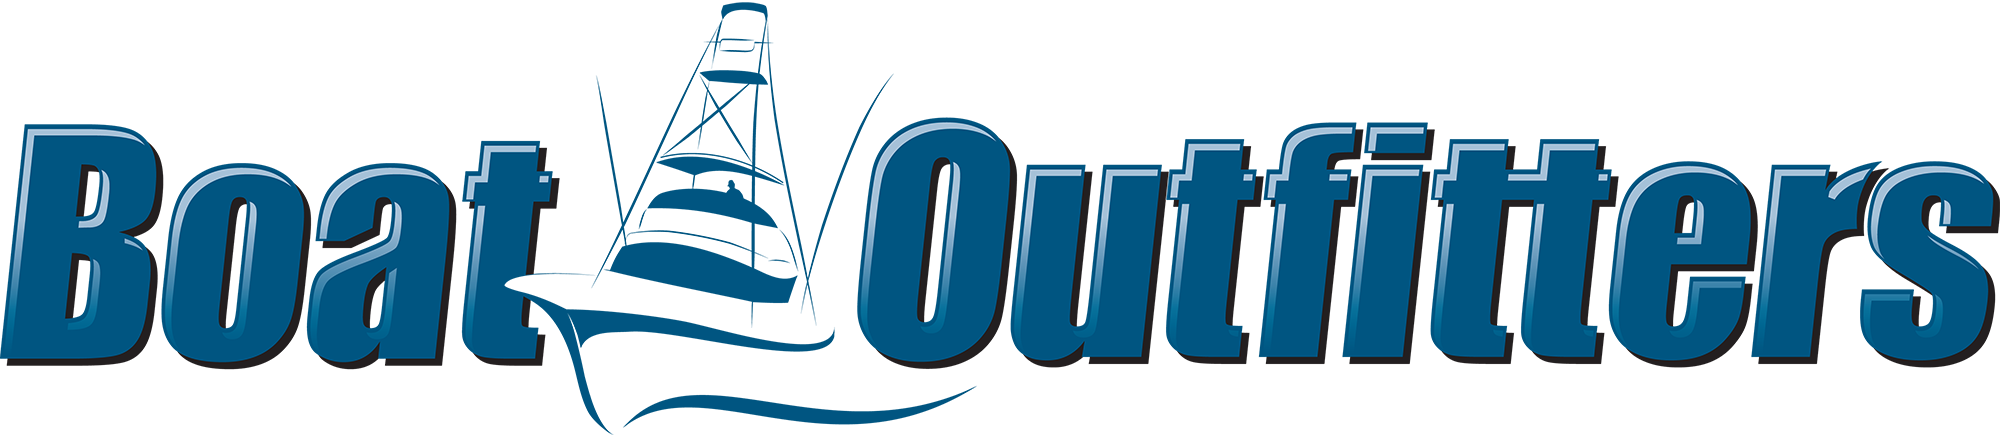 Boat Outfitters logo